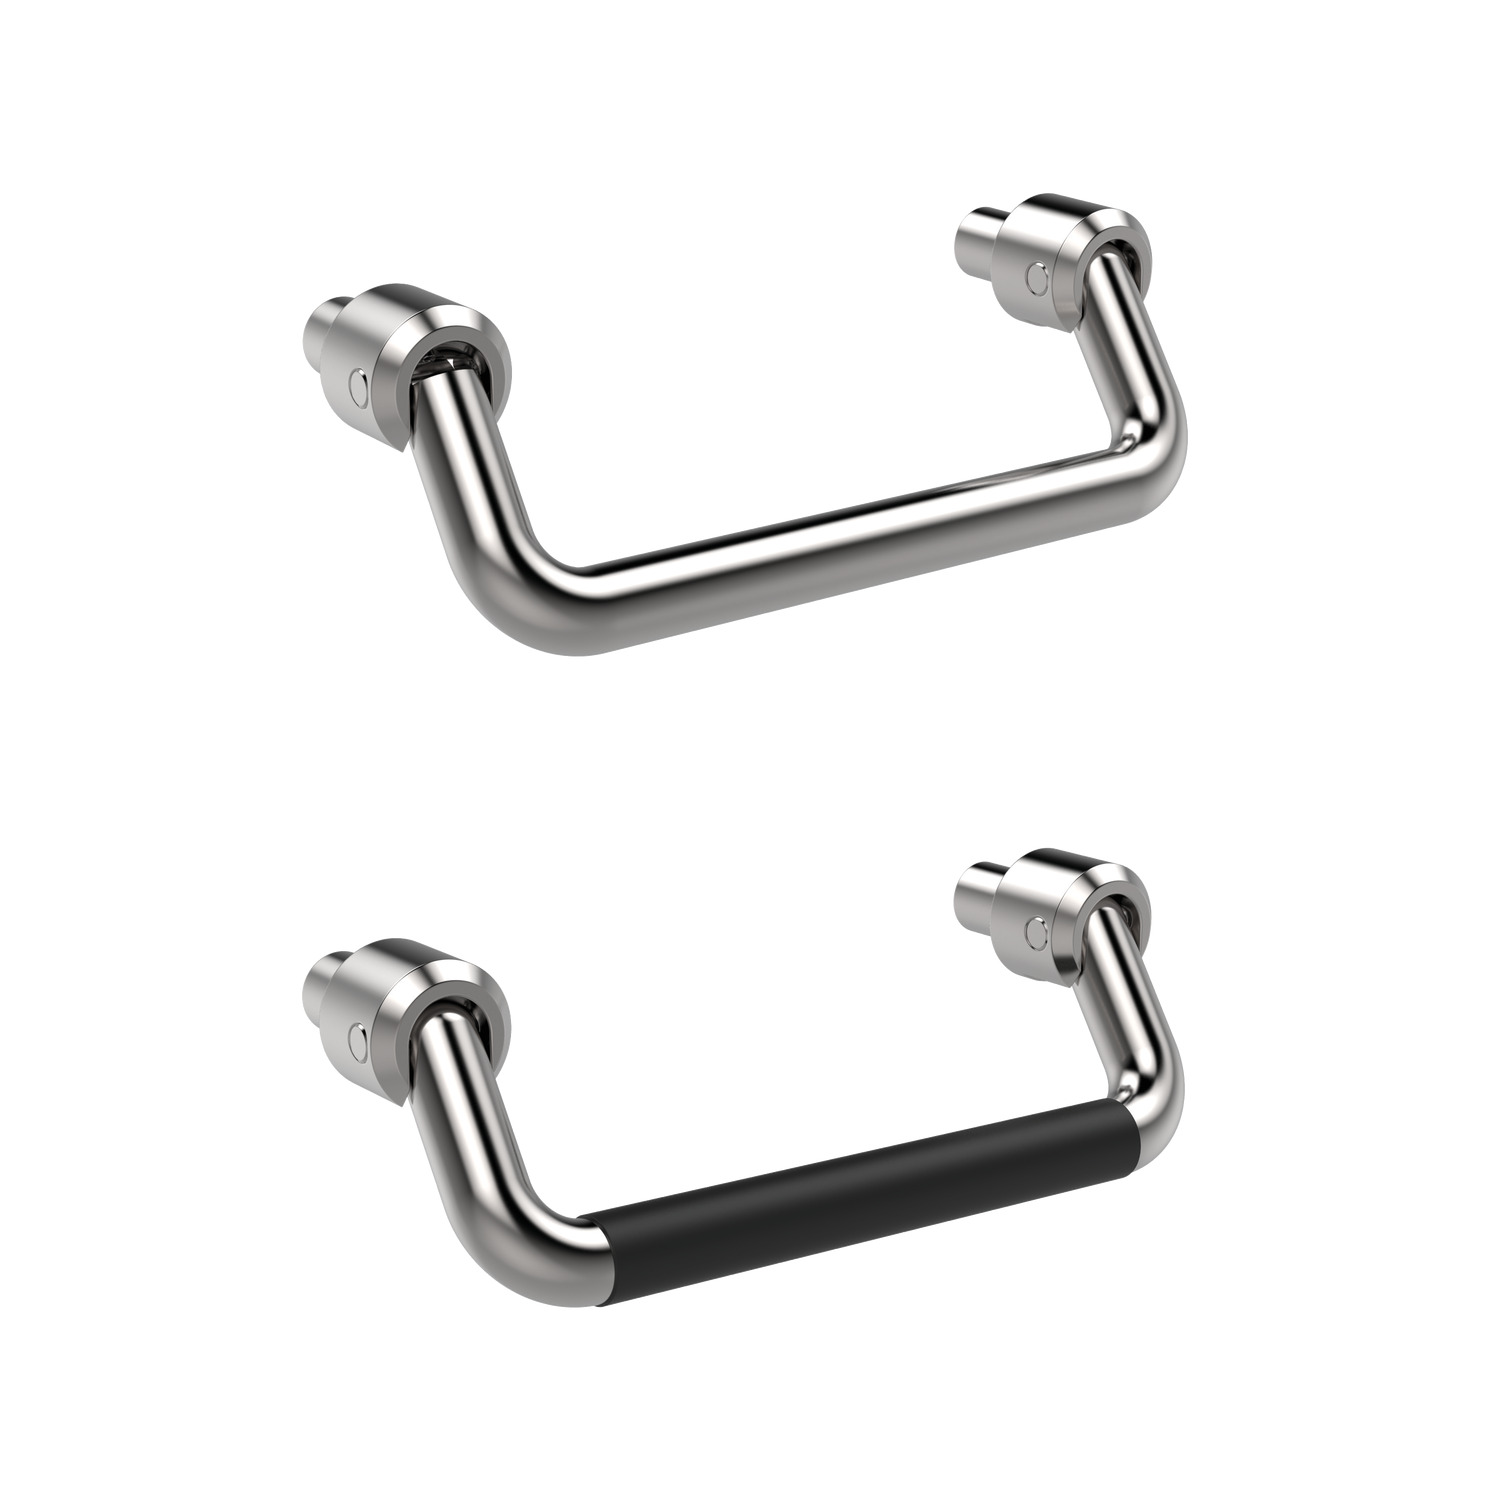 79570.W0120 Pull Handles, Collapsible - Steel Without Plastic Grip - 120